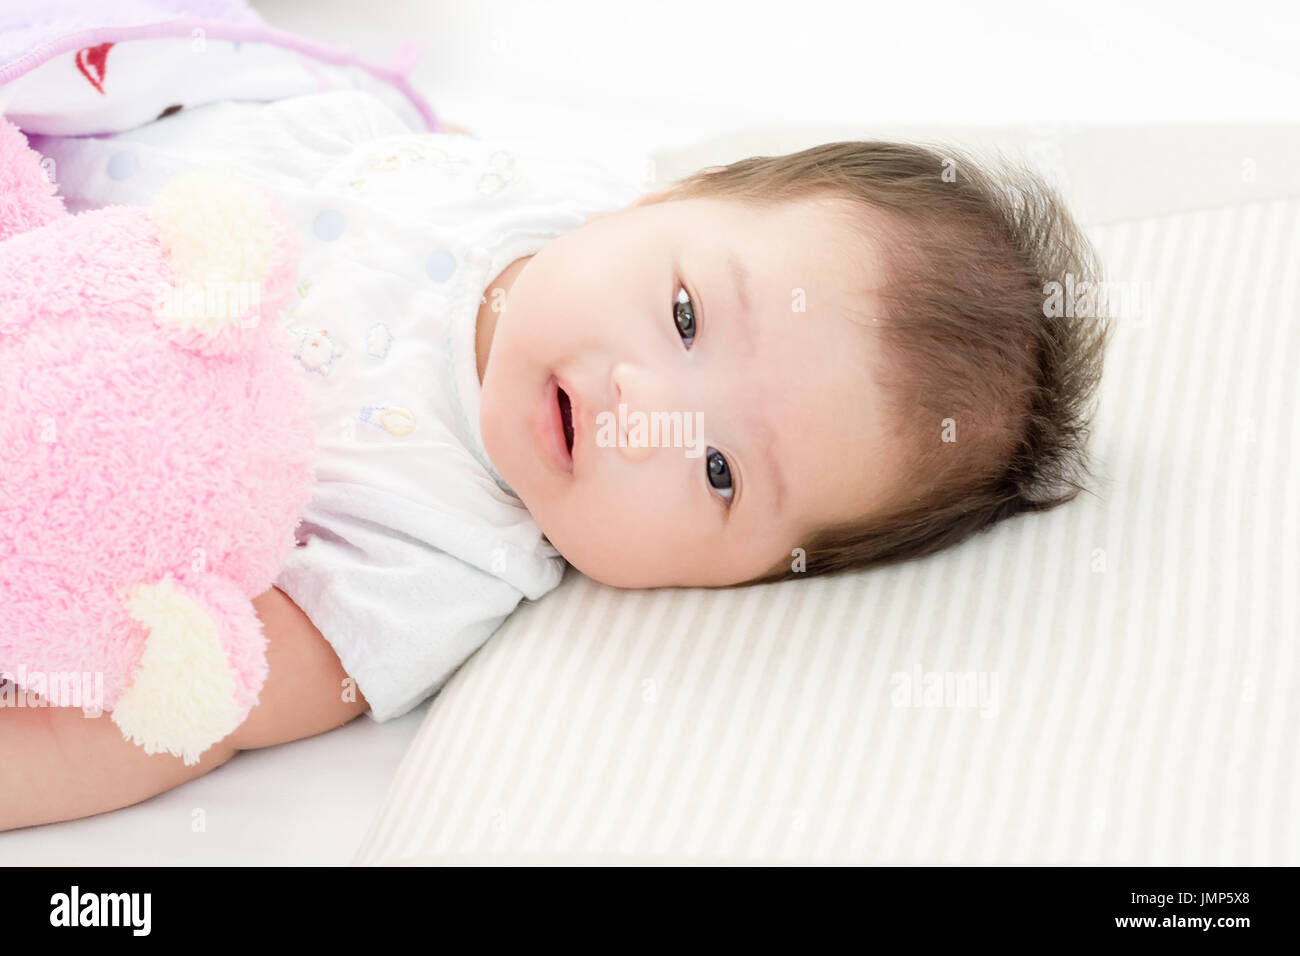 Portrait of adorable baby girl lying on the bed Stock Photo